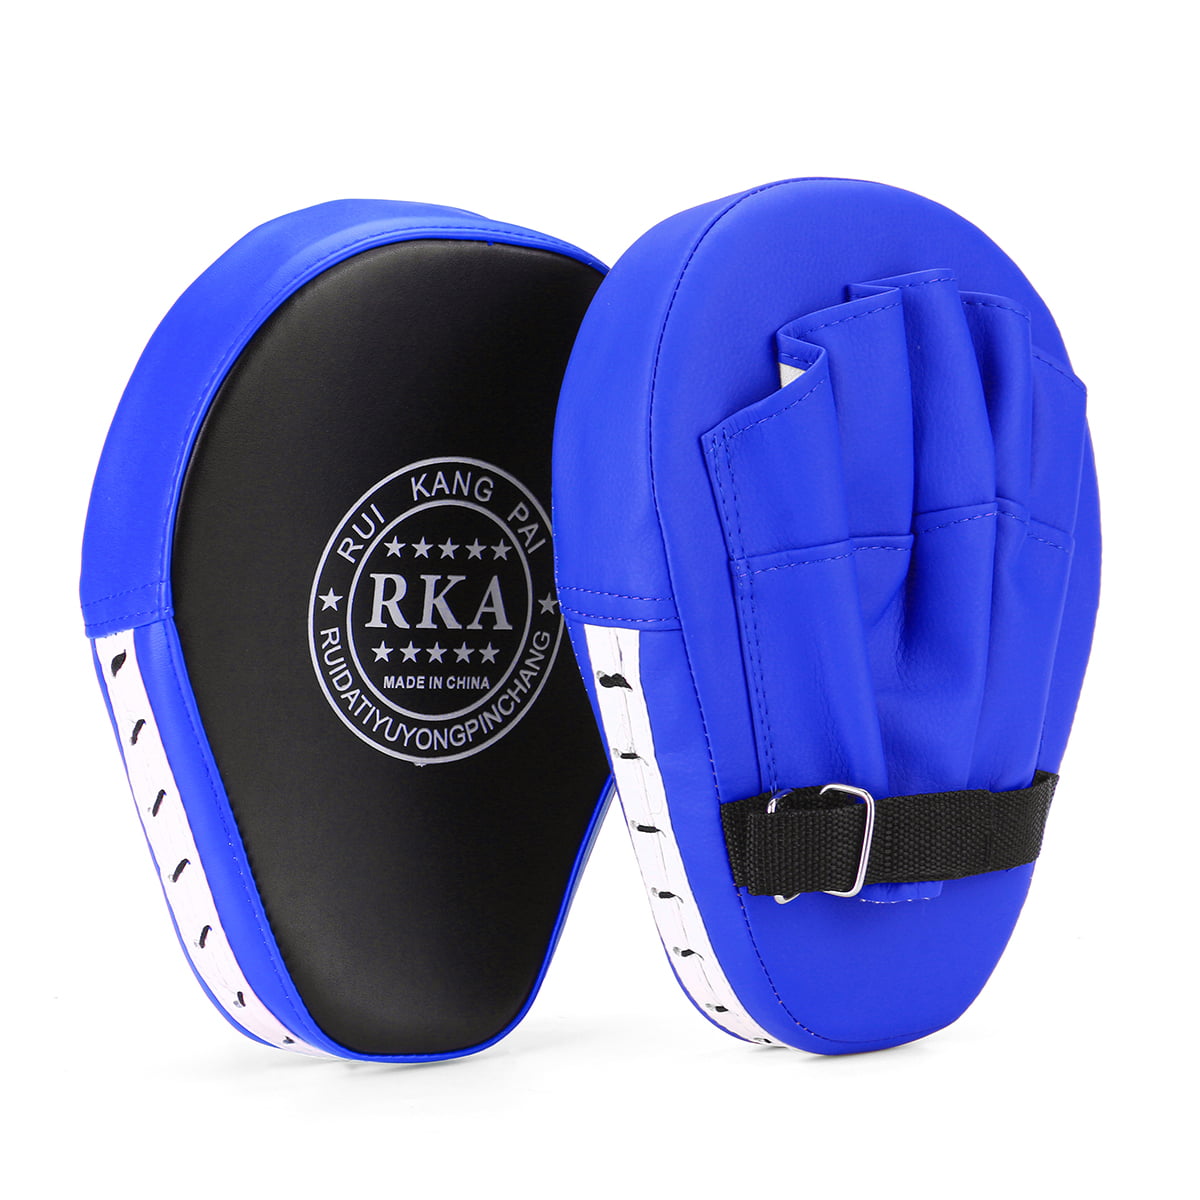 Martial Arts,Good Equipment for Training in The Gym or at Home Sparring Muay Thai Kick Boxing Pad for Training,Leather Training Hand Pads,Ideal for MMA Karate Black Dojo 